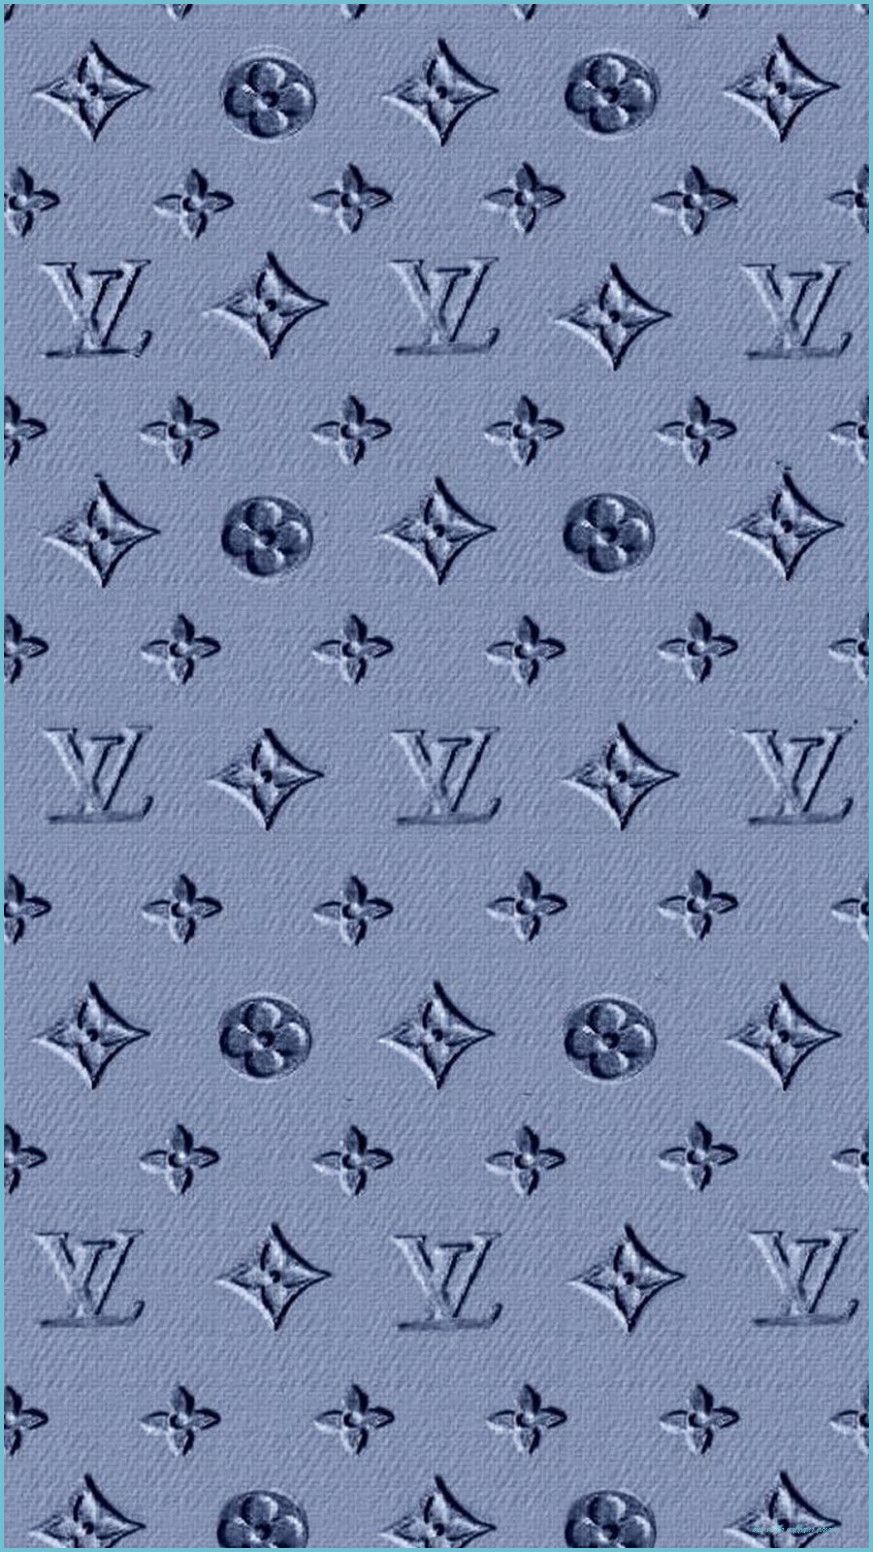 🖤 Louis Vuitton Aesthetic Background - 2021  New wallpaper iphone, Louis  vuitton iphone wallpaper, Apple wallpaper